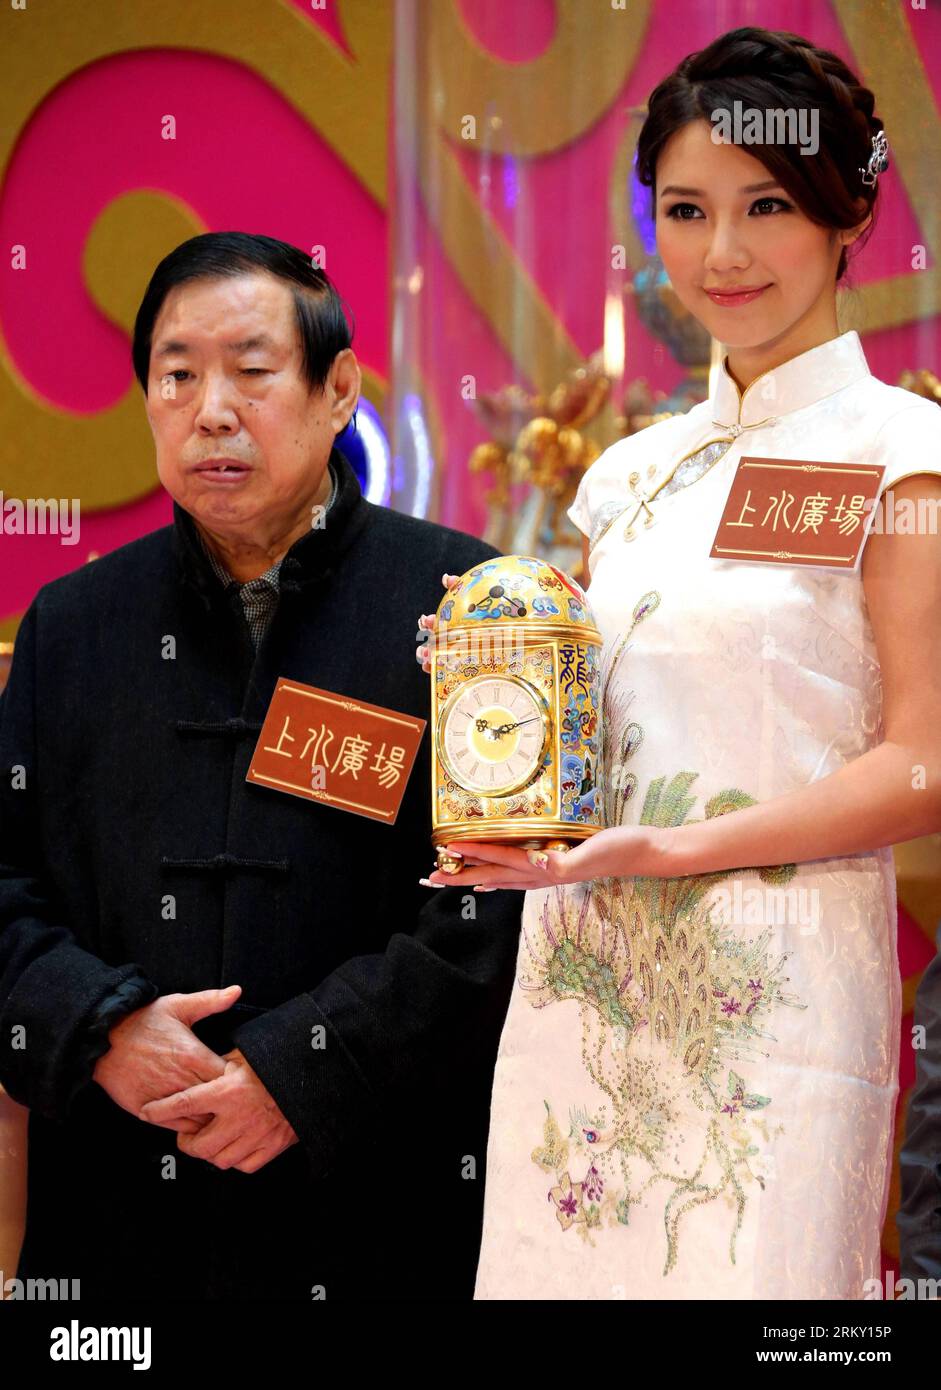 Bildnummer: 59117010  Datum: 22.01.2013  Copyright: imago/Xinhua (130122) -- HONG KONG, Jan. 22, 2013 (Xinhua) -- Artist Zhang Tonglu (L) looks on as a cloisonne clock he made is presented by Elva Ni, the winner of 2005 Miss Chinese Toronto Pageant, during an exhibition in south China s Hong Kong, Jan. 22, 2013. An exhibition of Zhang Tonglu s cloisonne art works was held here on Tuesday, showing 22 pieces of cloisonne works. (Xinhua/Li Peng) (xzj) CHINA-HONG KONG-CLOISONNE-EXHIBITION (CN) PUBLICATIONxNOTxINxCHN Kultur Entertainment People Schönheitskönigin Handwerk Kunst Kunsthandwerk Exponat Stock Photo